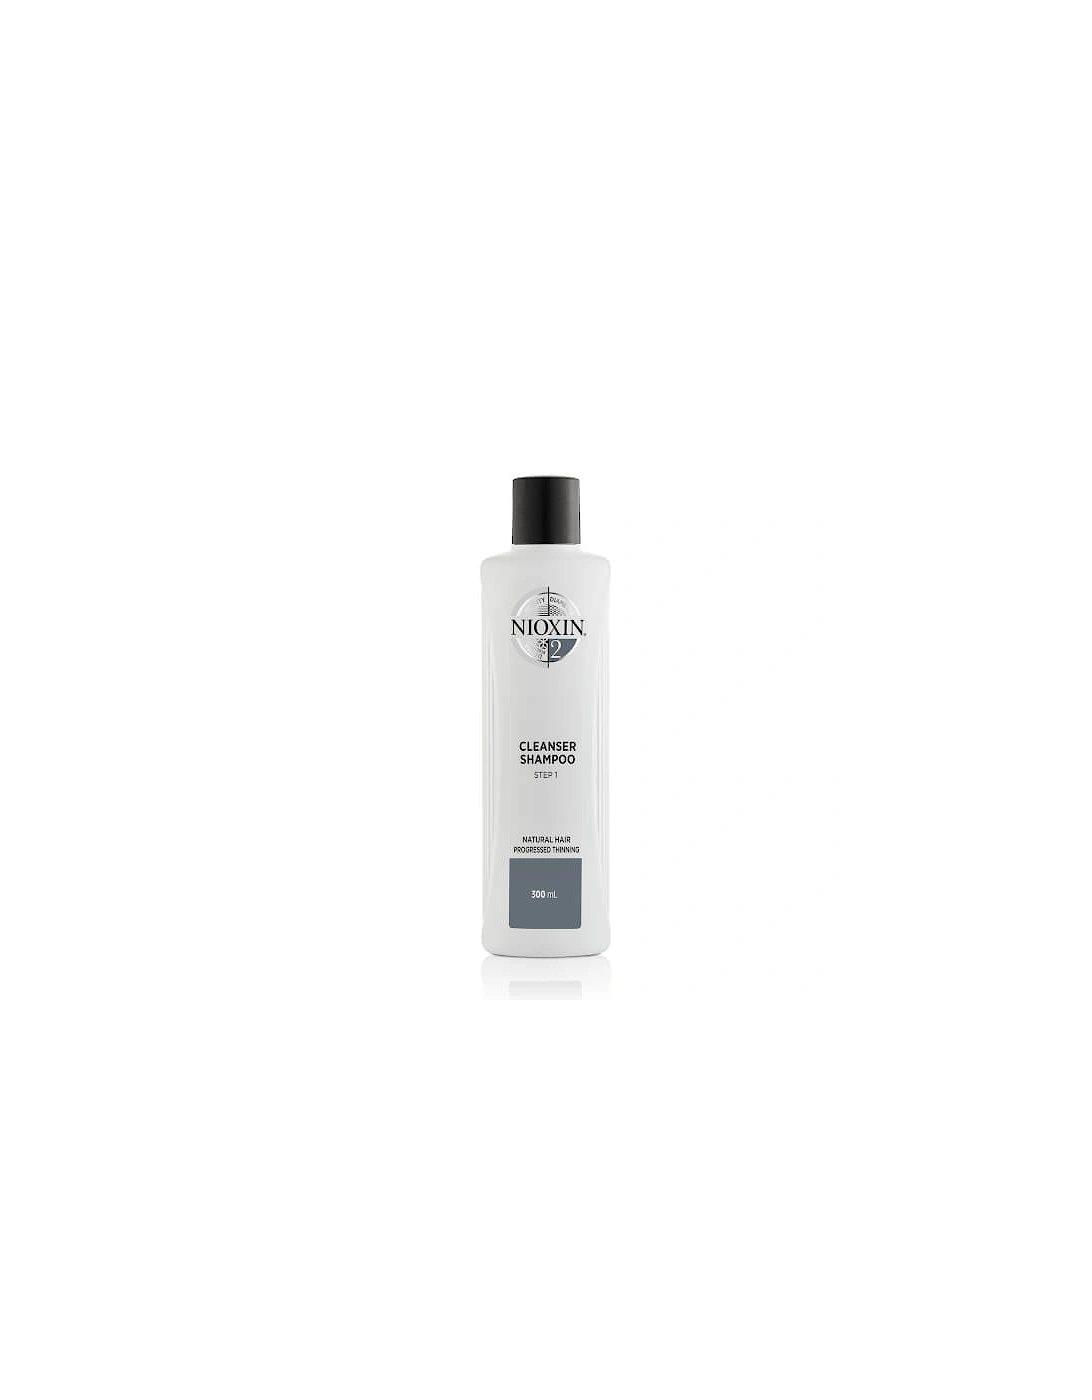 3-Part System 2 Cleanser Shampoo for Natural Hair with Progressed Thinning 300ml - NIOXIN, 2 of 1